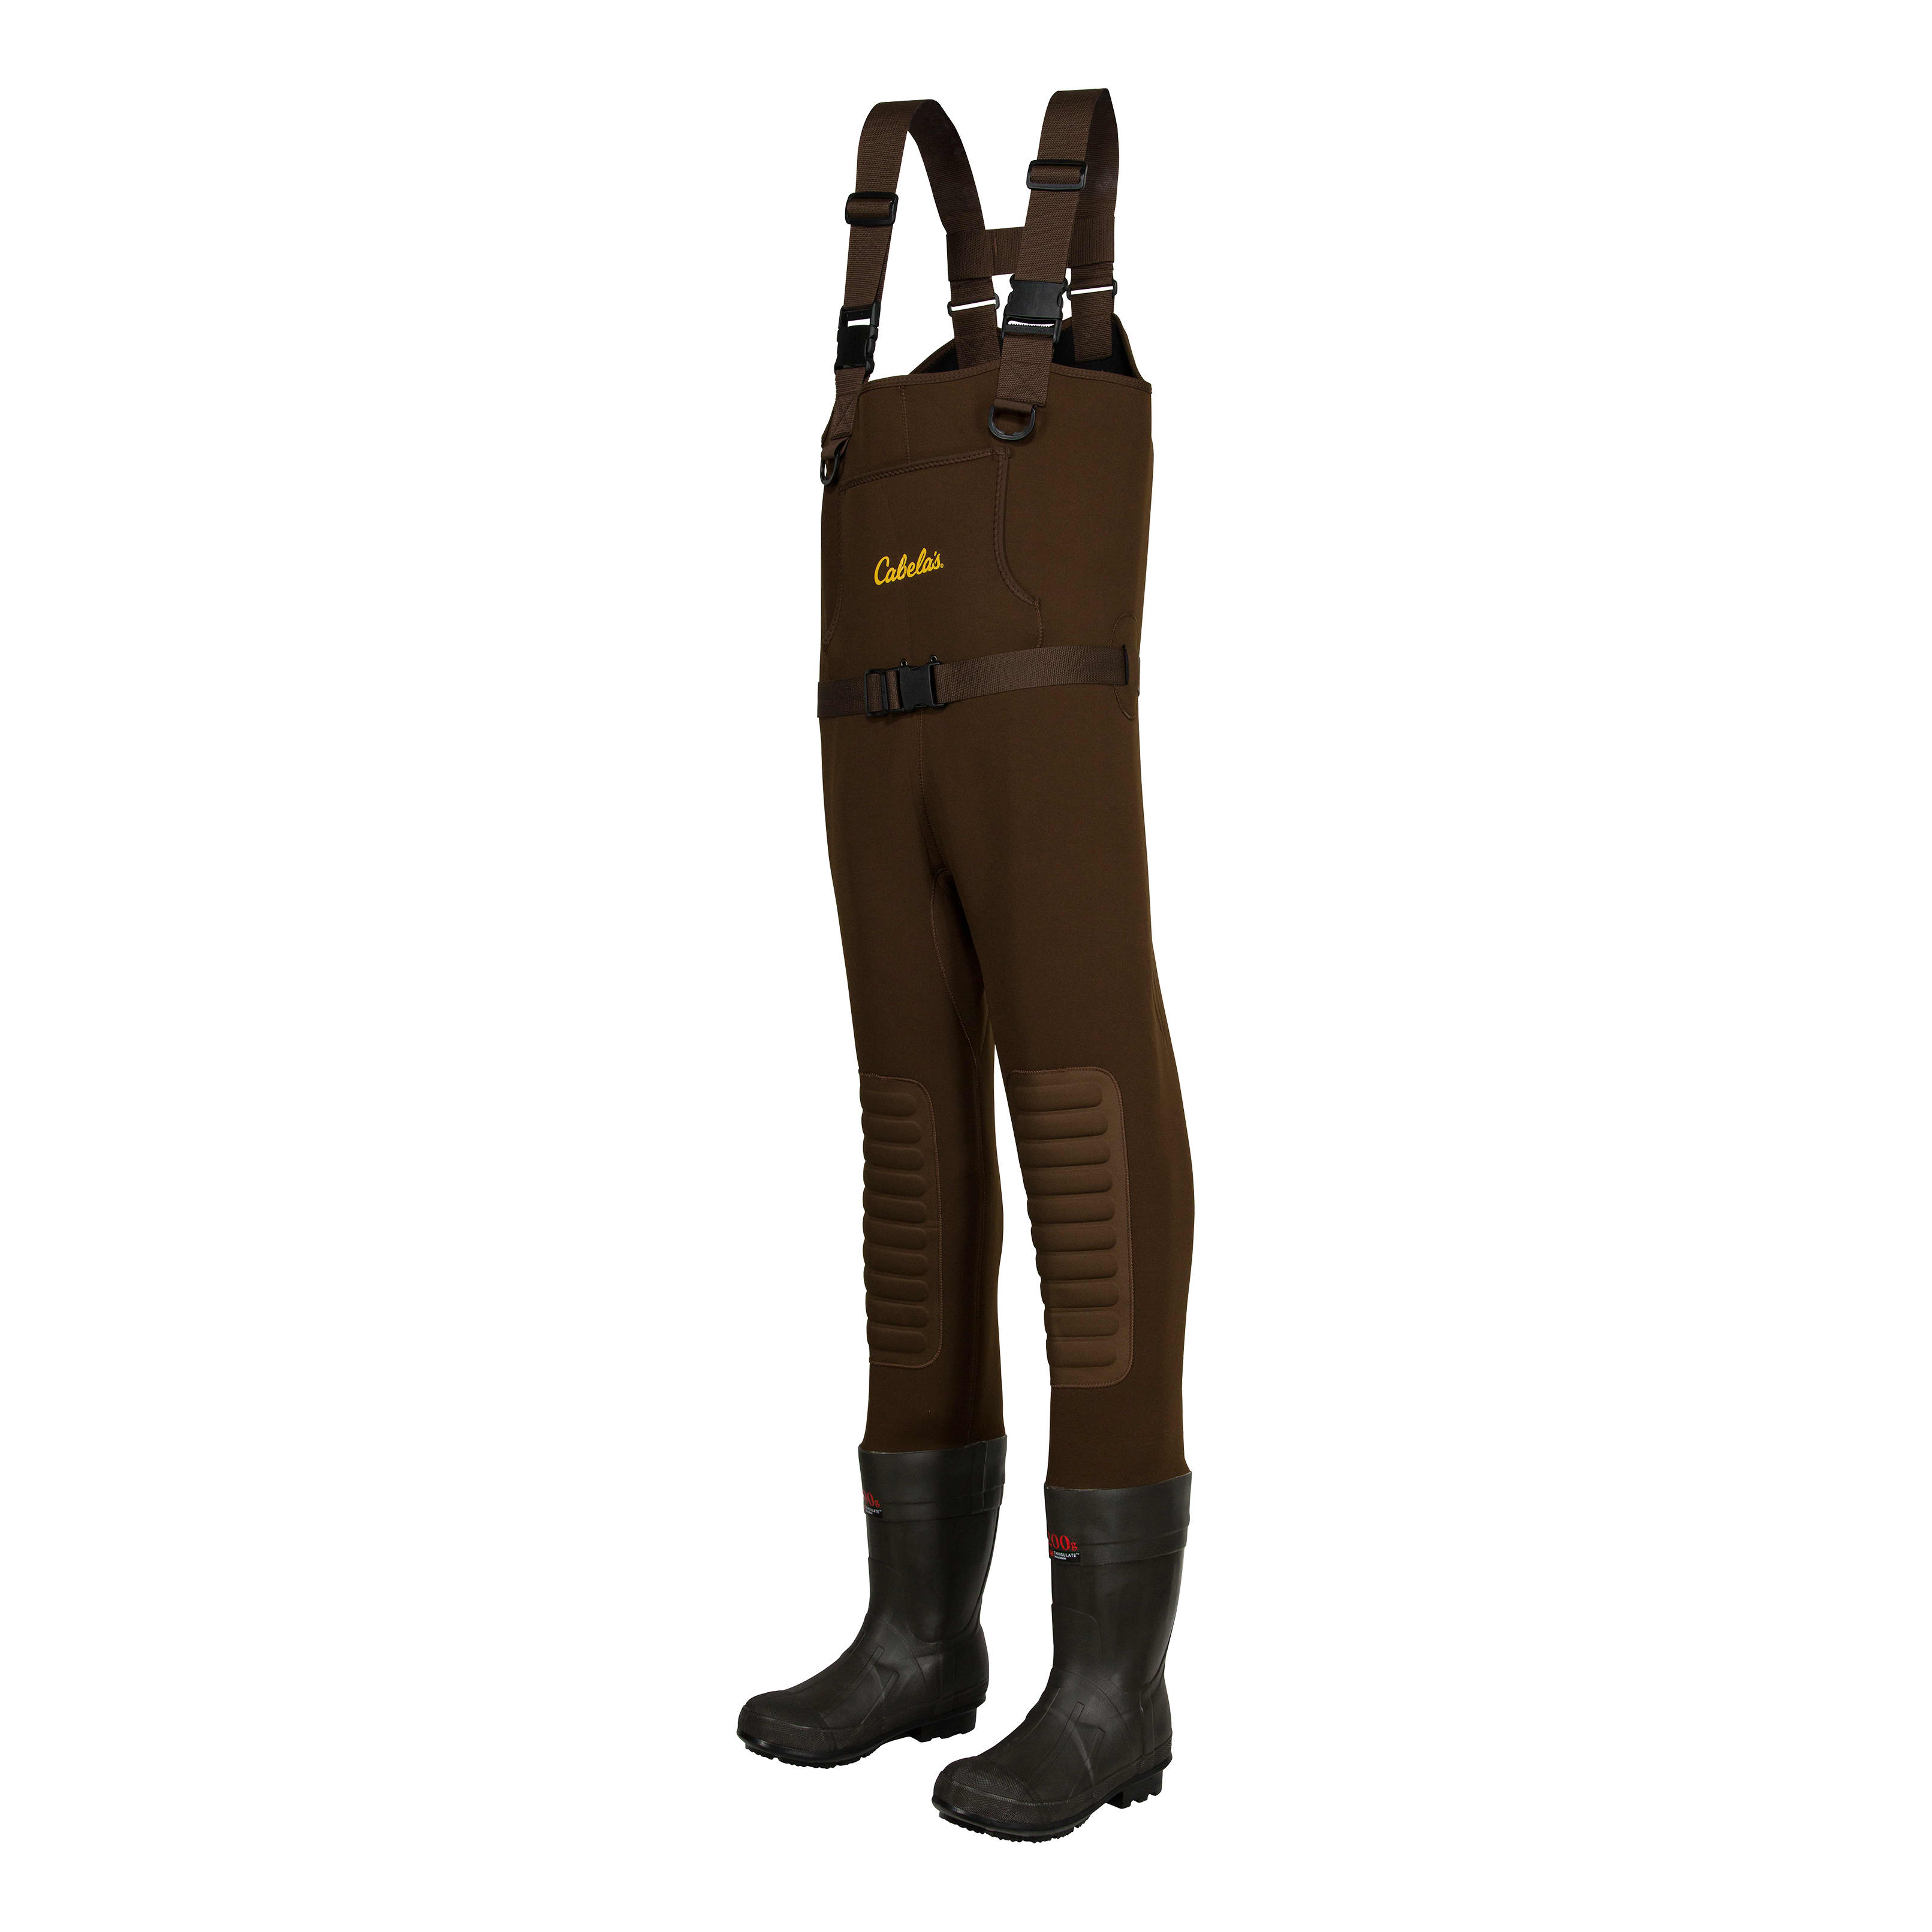  HAIKANGSHOP Fly Fishing Waders for Women with Boots and  Double-Knee-Pads, High Chest Wader for Duck Hunting Fly Fishing (Color :  Blue, Size : 36) : Sports & Outdoors